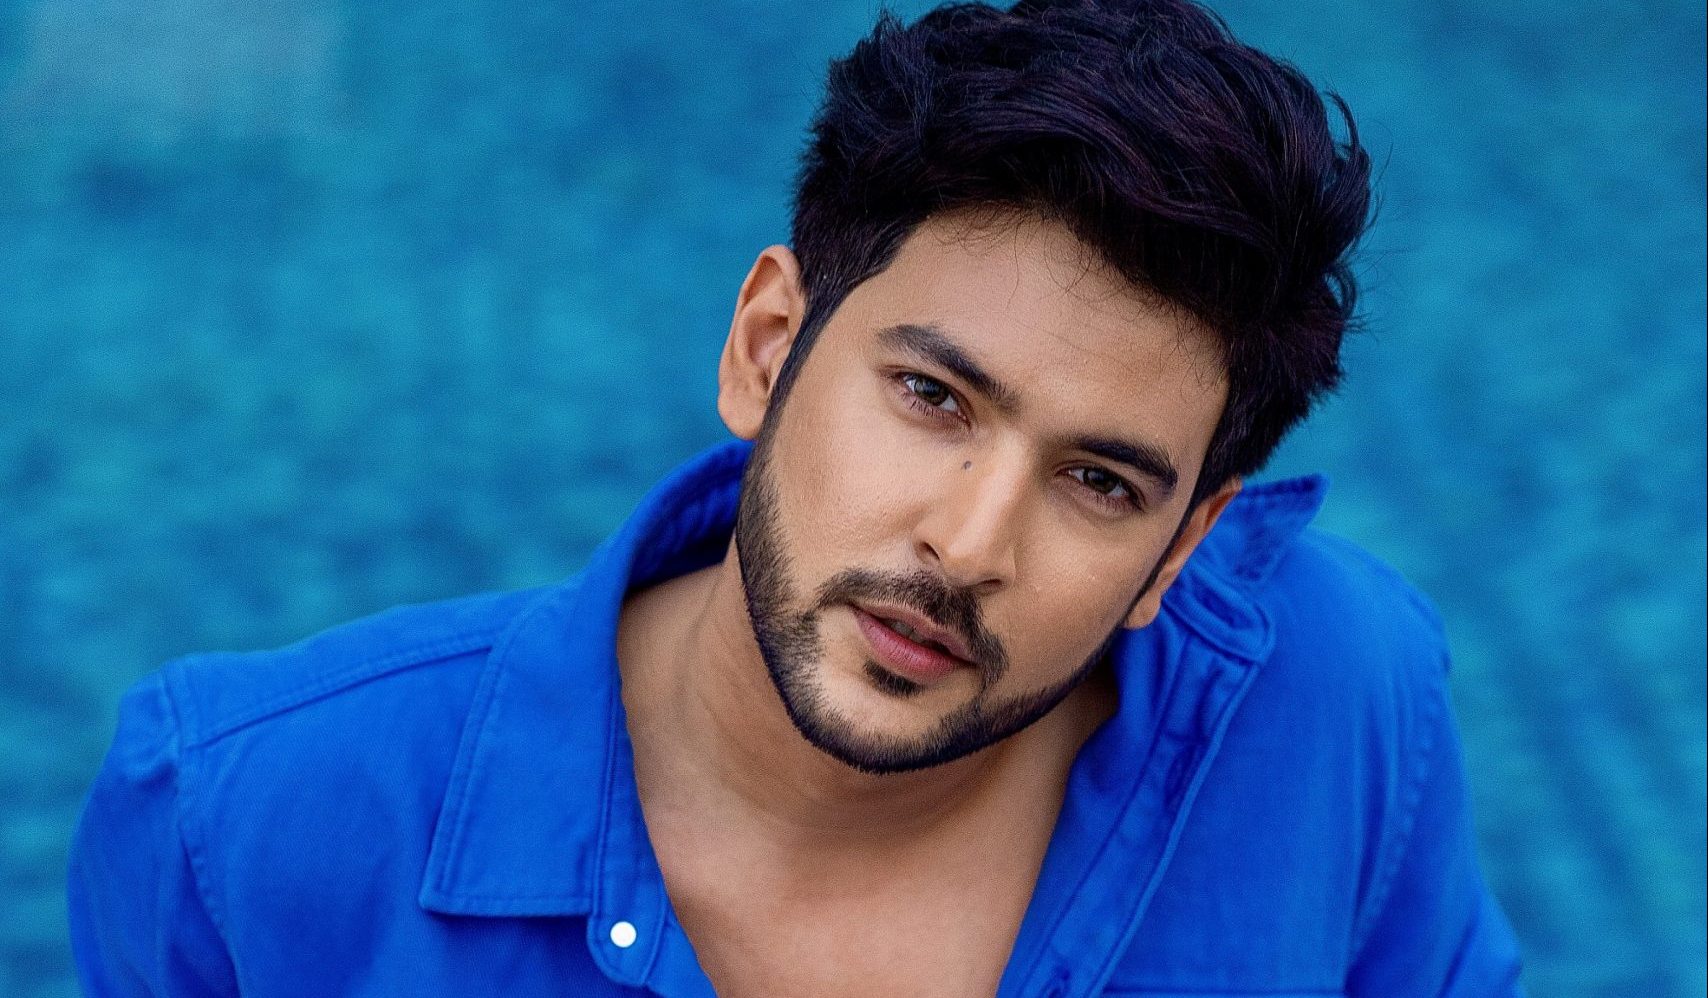 After wrapping up shoot of ‘Goodbye’, Shivin Narang says, “Thank you Vikas Bahl and Mukesh Chhabra for believing in me”!